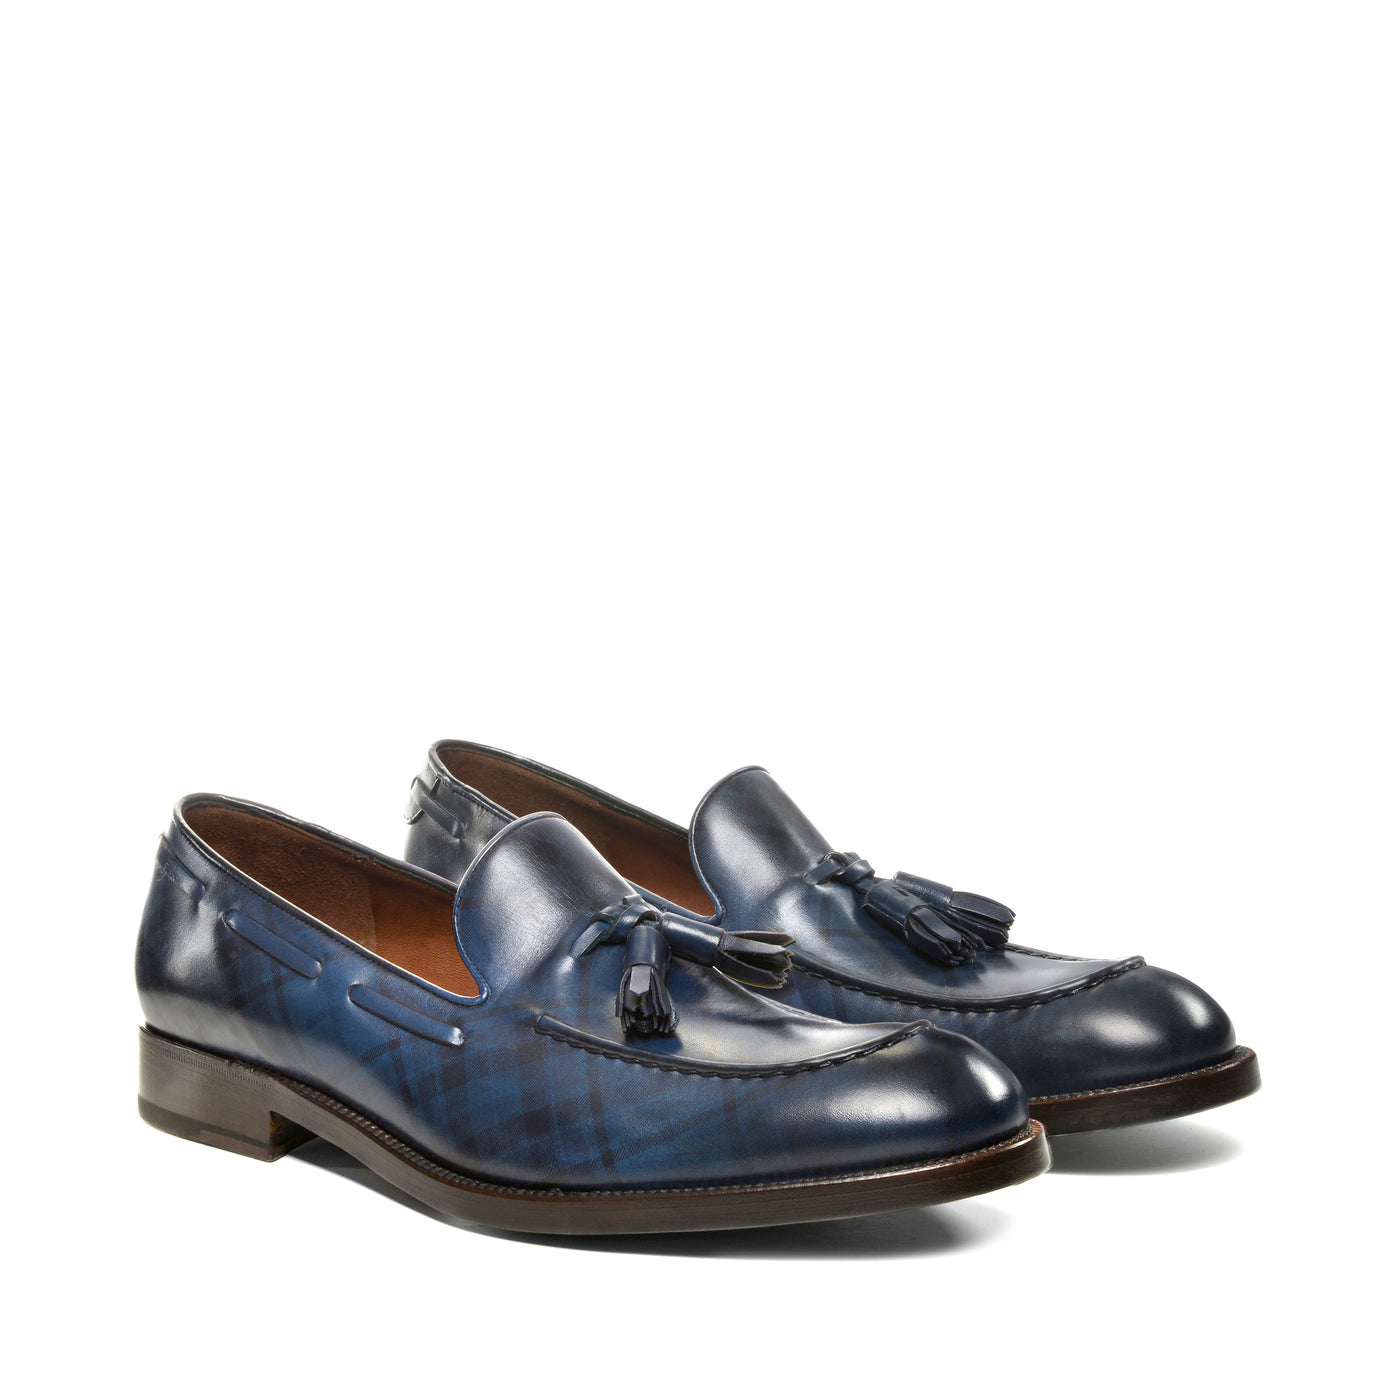 Shop The Latest Collection Of Outlet - Fratelli Rossetti Man Brera Loafer 12887 In Lebanon